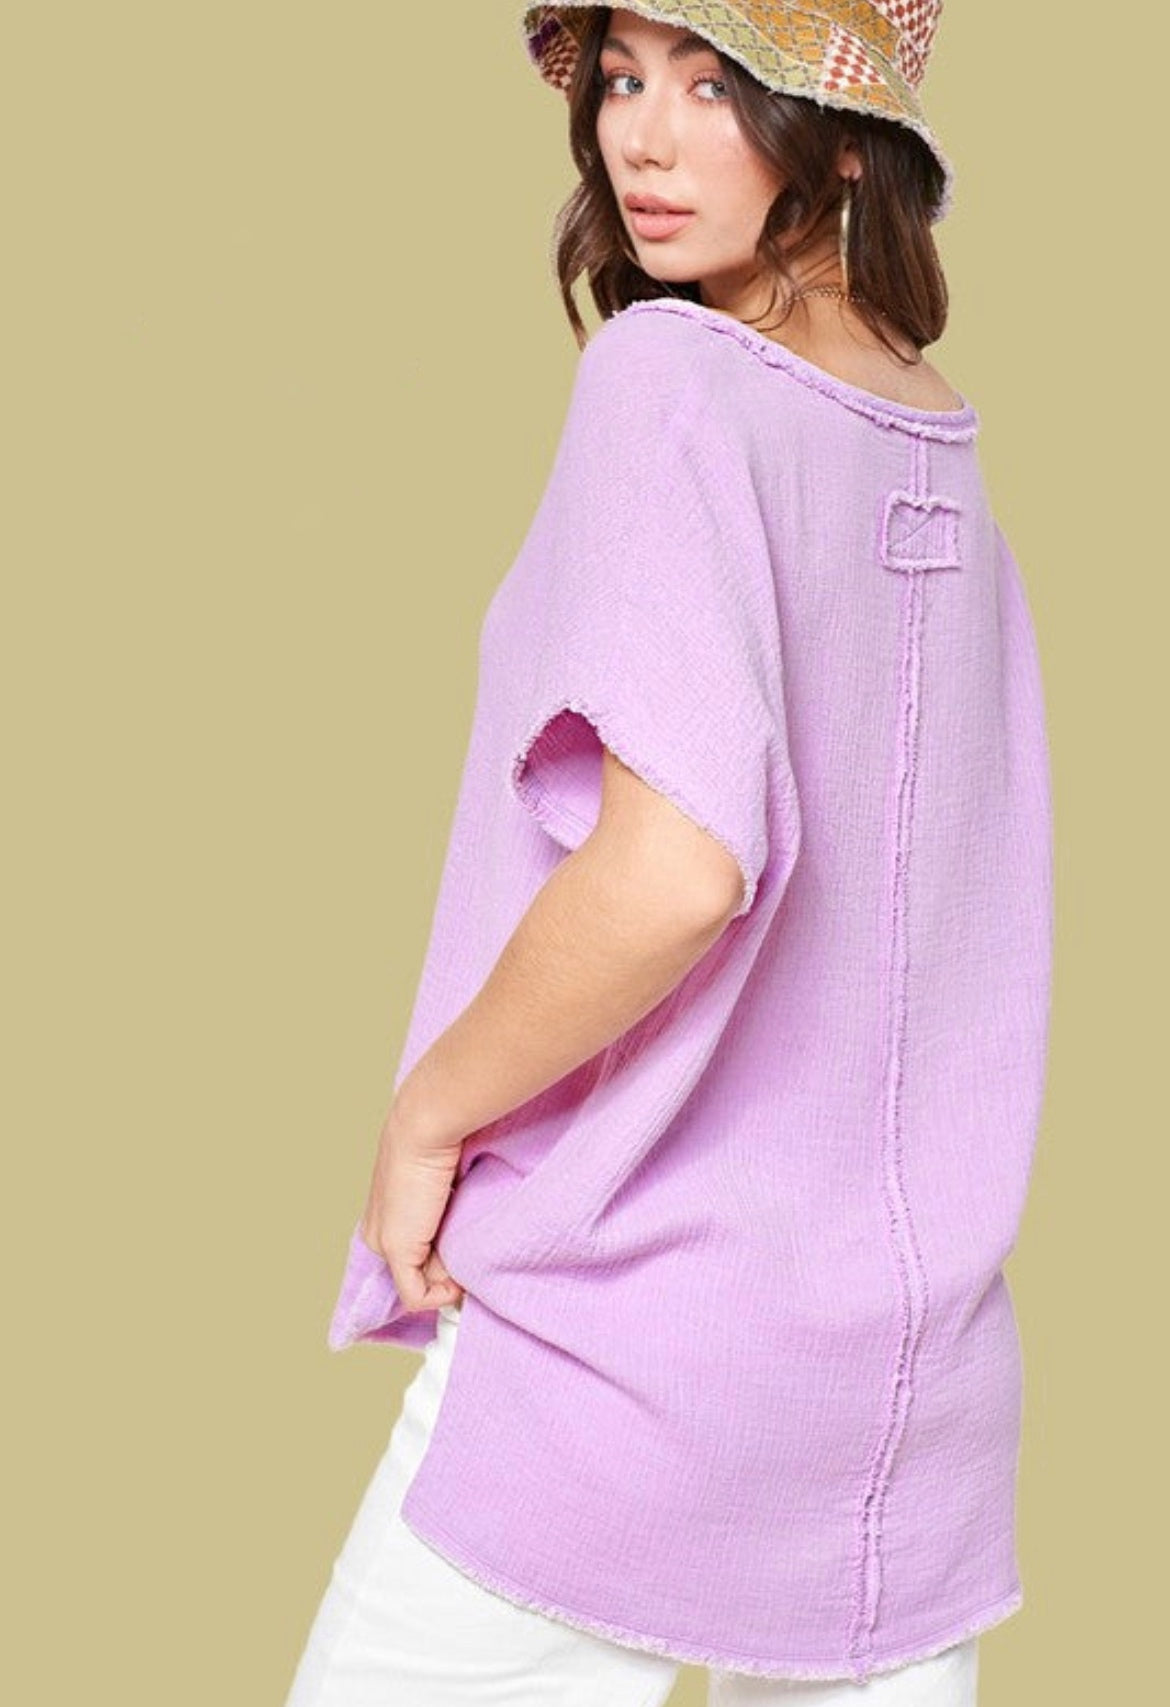 Lilac V neck top in a soft muslin fabric and raw hemlines. Short sleeves, Side slits and hi low hemline. Top features reversed stitching down the front and back center. 